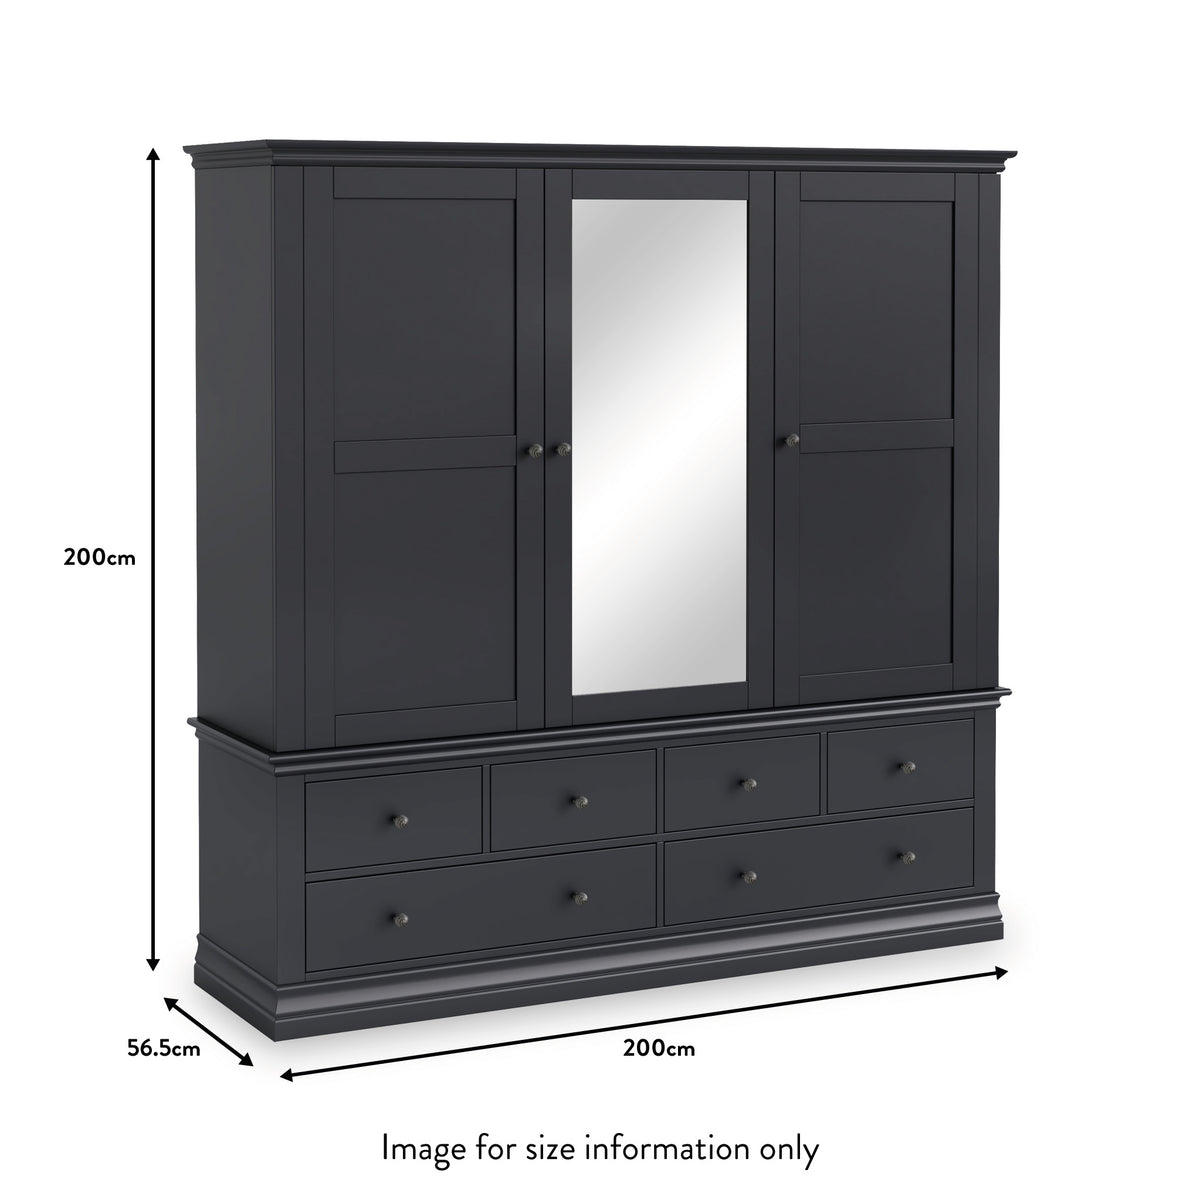 Porter Charcoal Triple Wardrobe with 6 Drawers dimensions